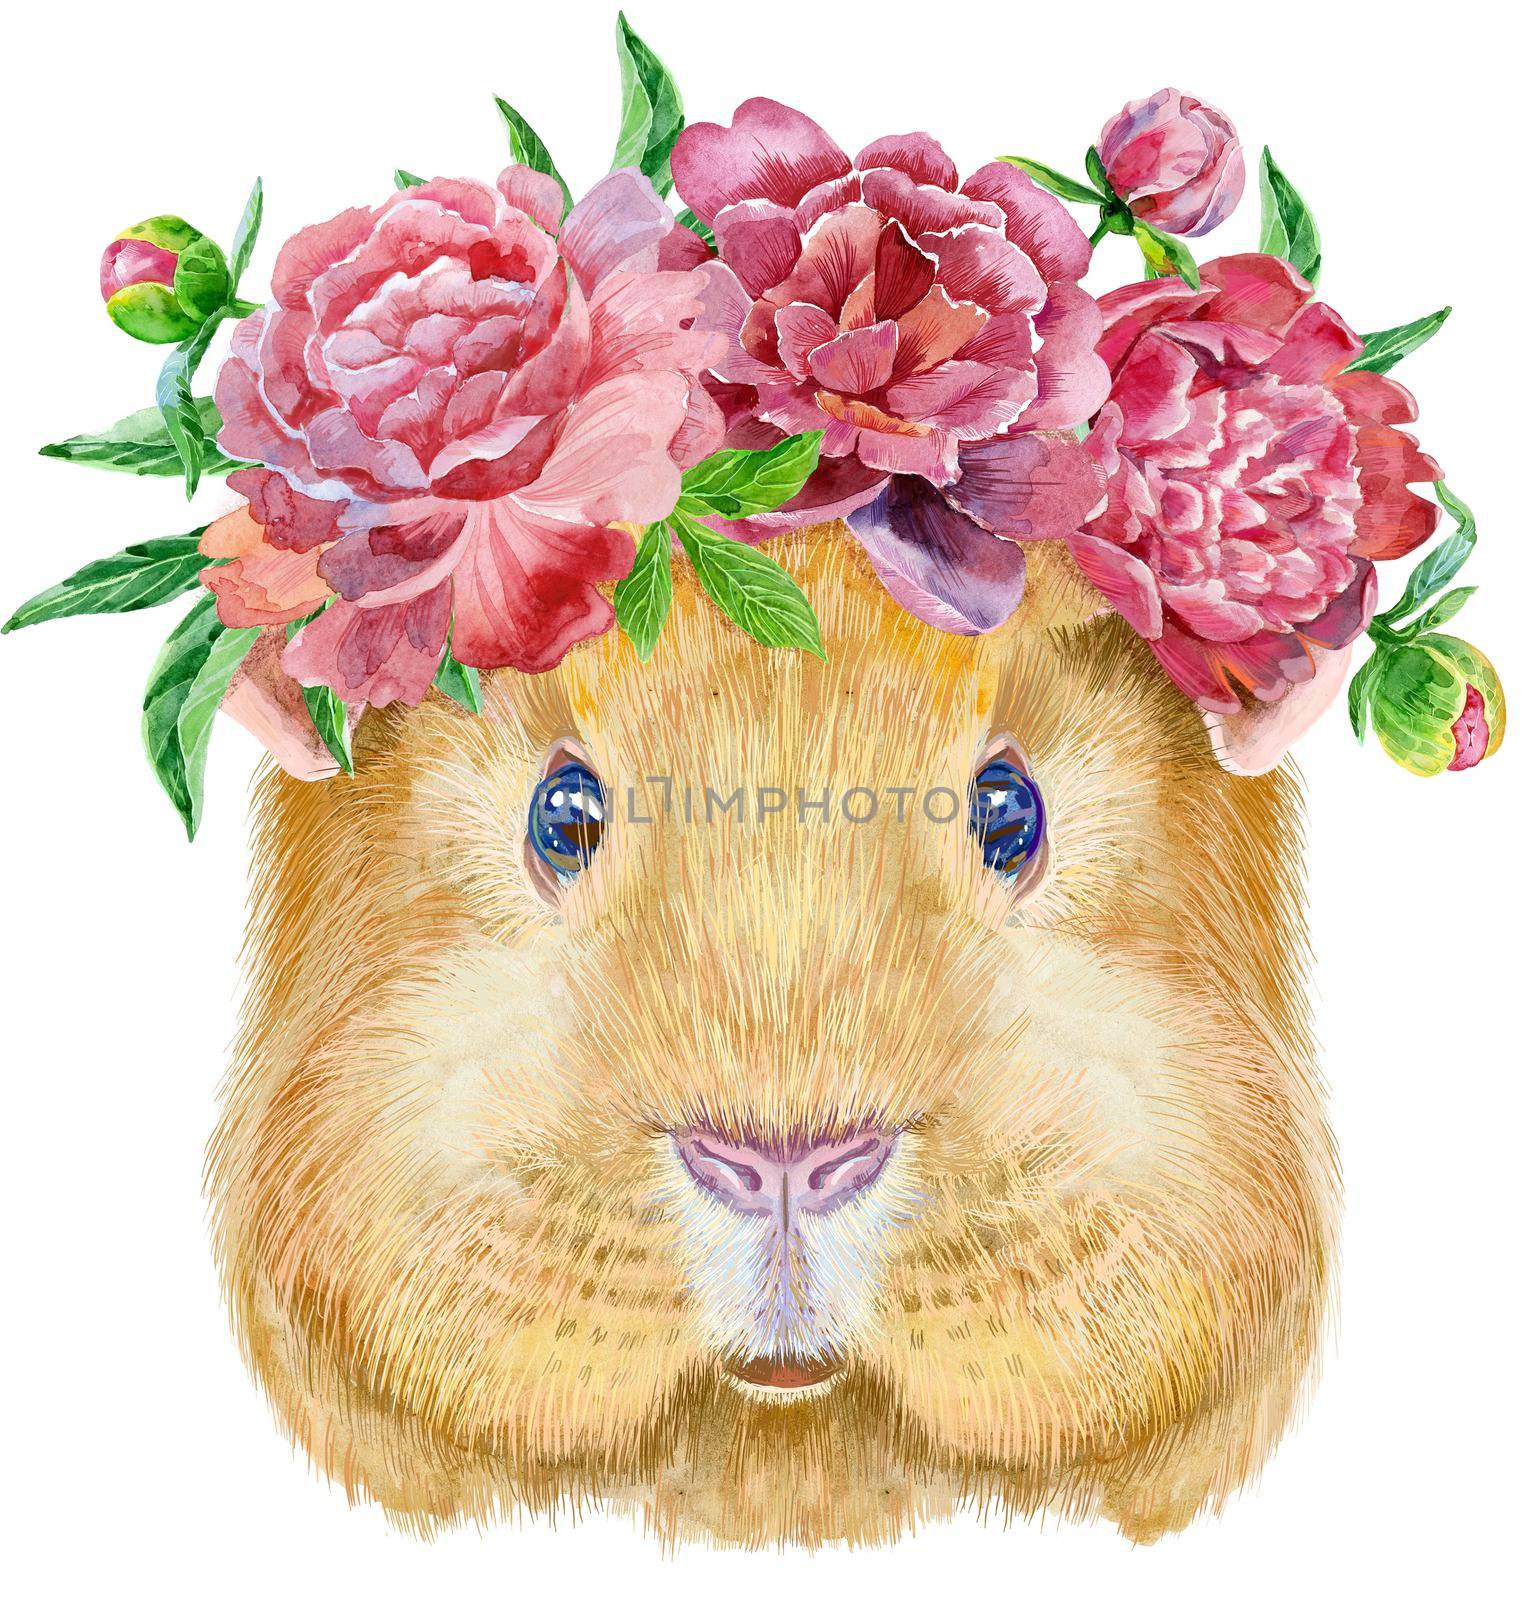 Watercolor portrait of Self guinea pig with flowers on white background by NataOmsk